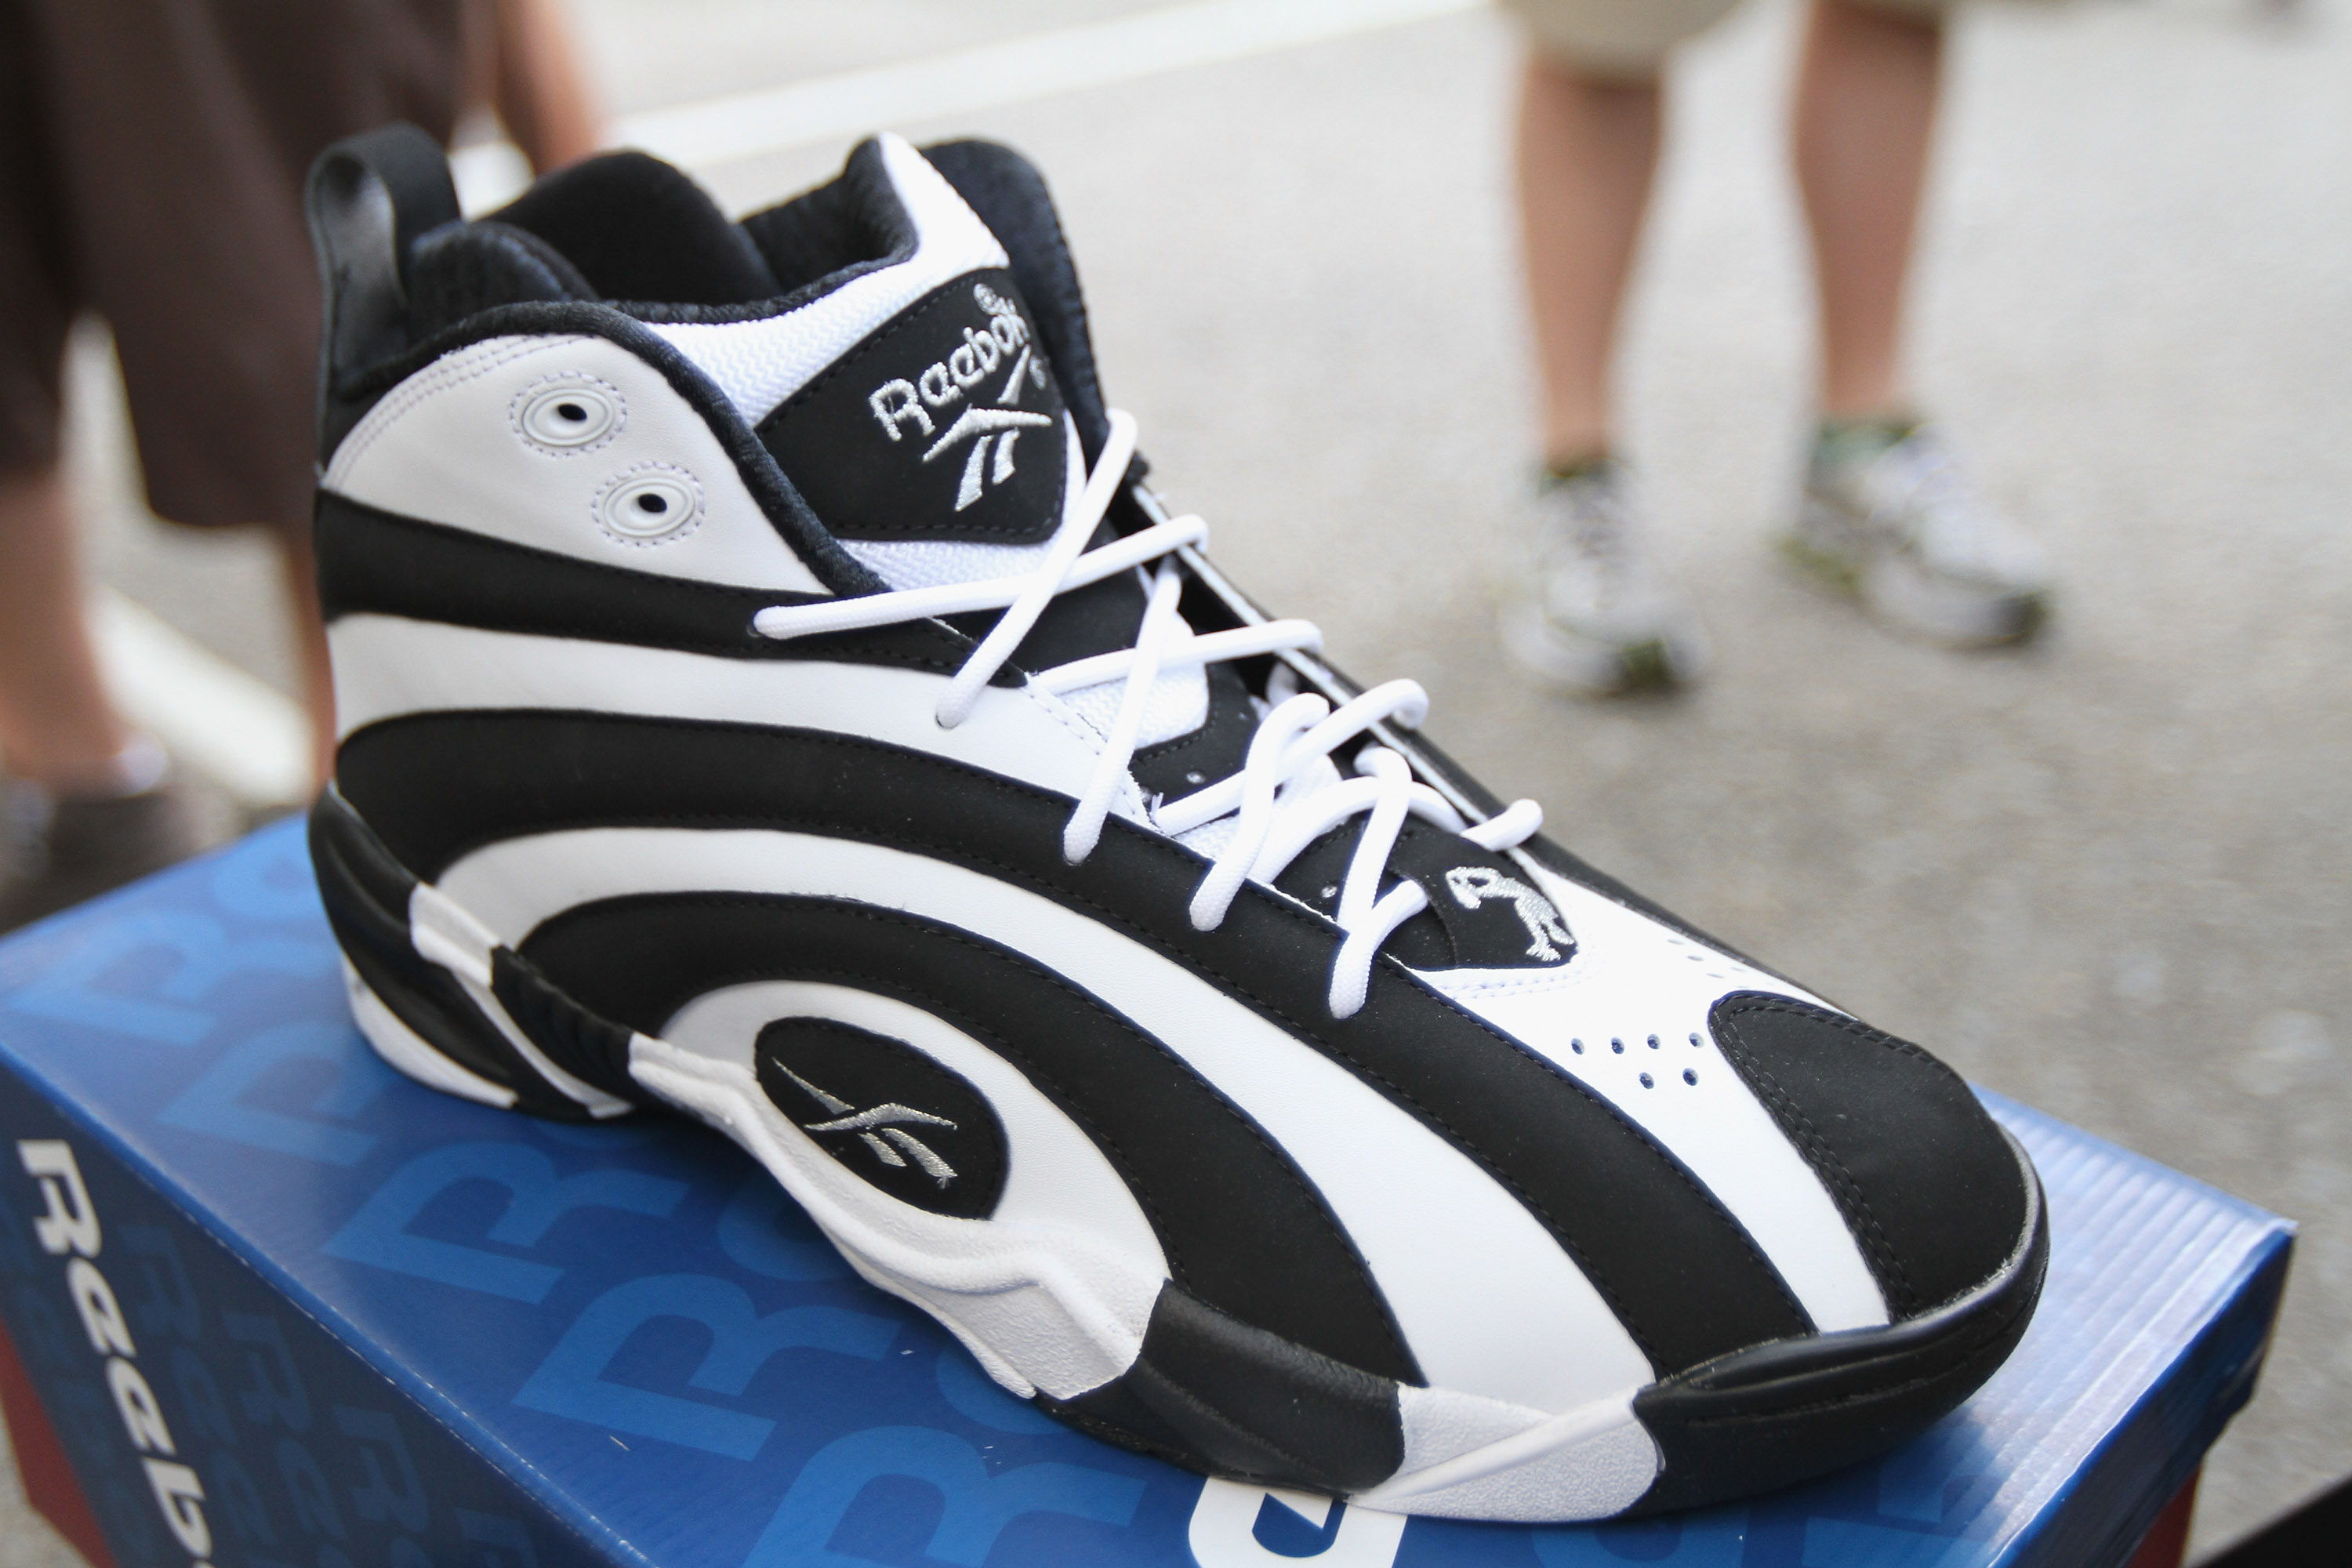 NBA hall-of-famer Shaquille O'Neal says he wants to buy Reebok